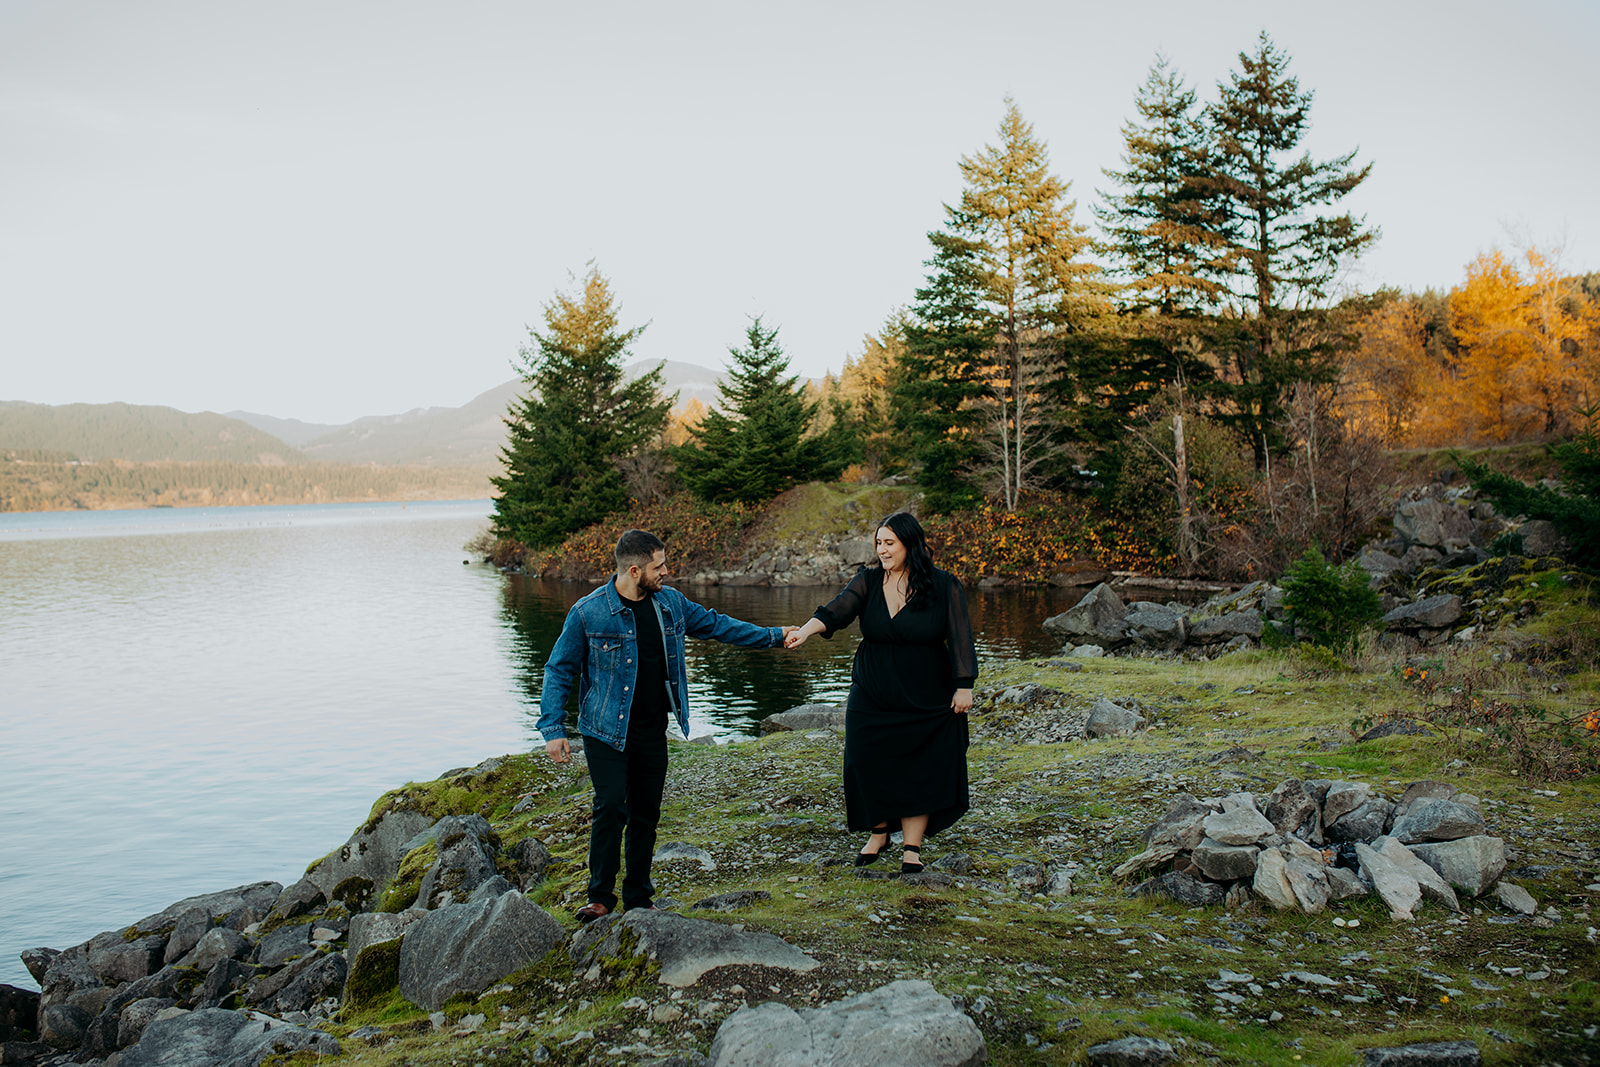 man holds hands with woman along shore with trees in background